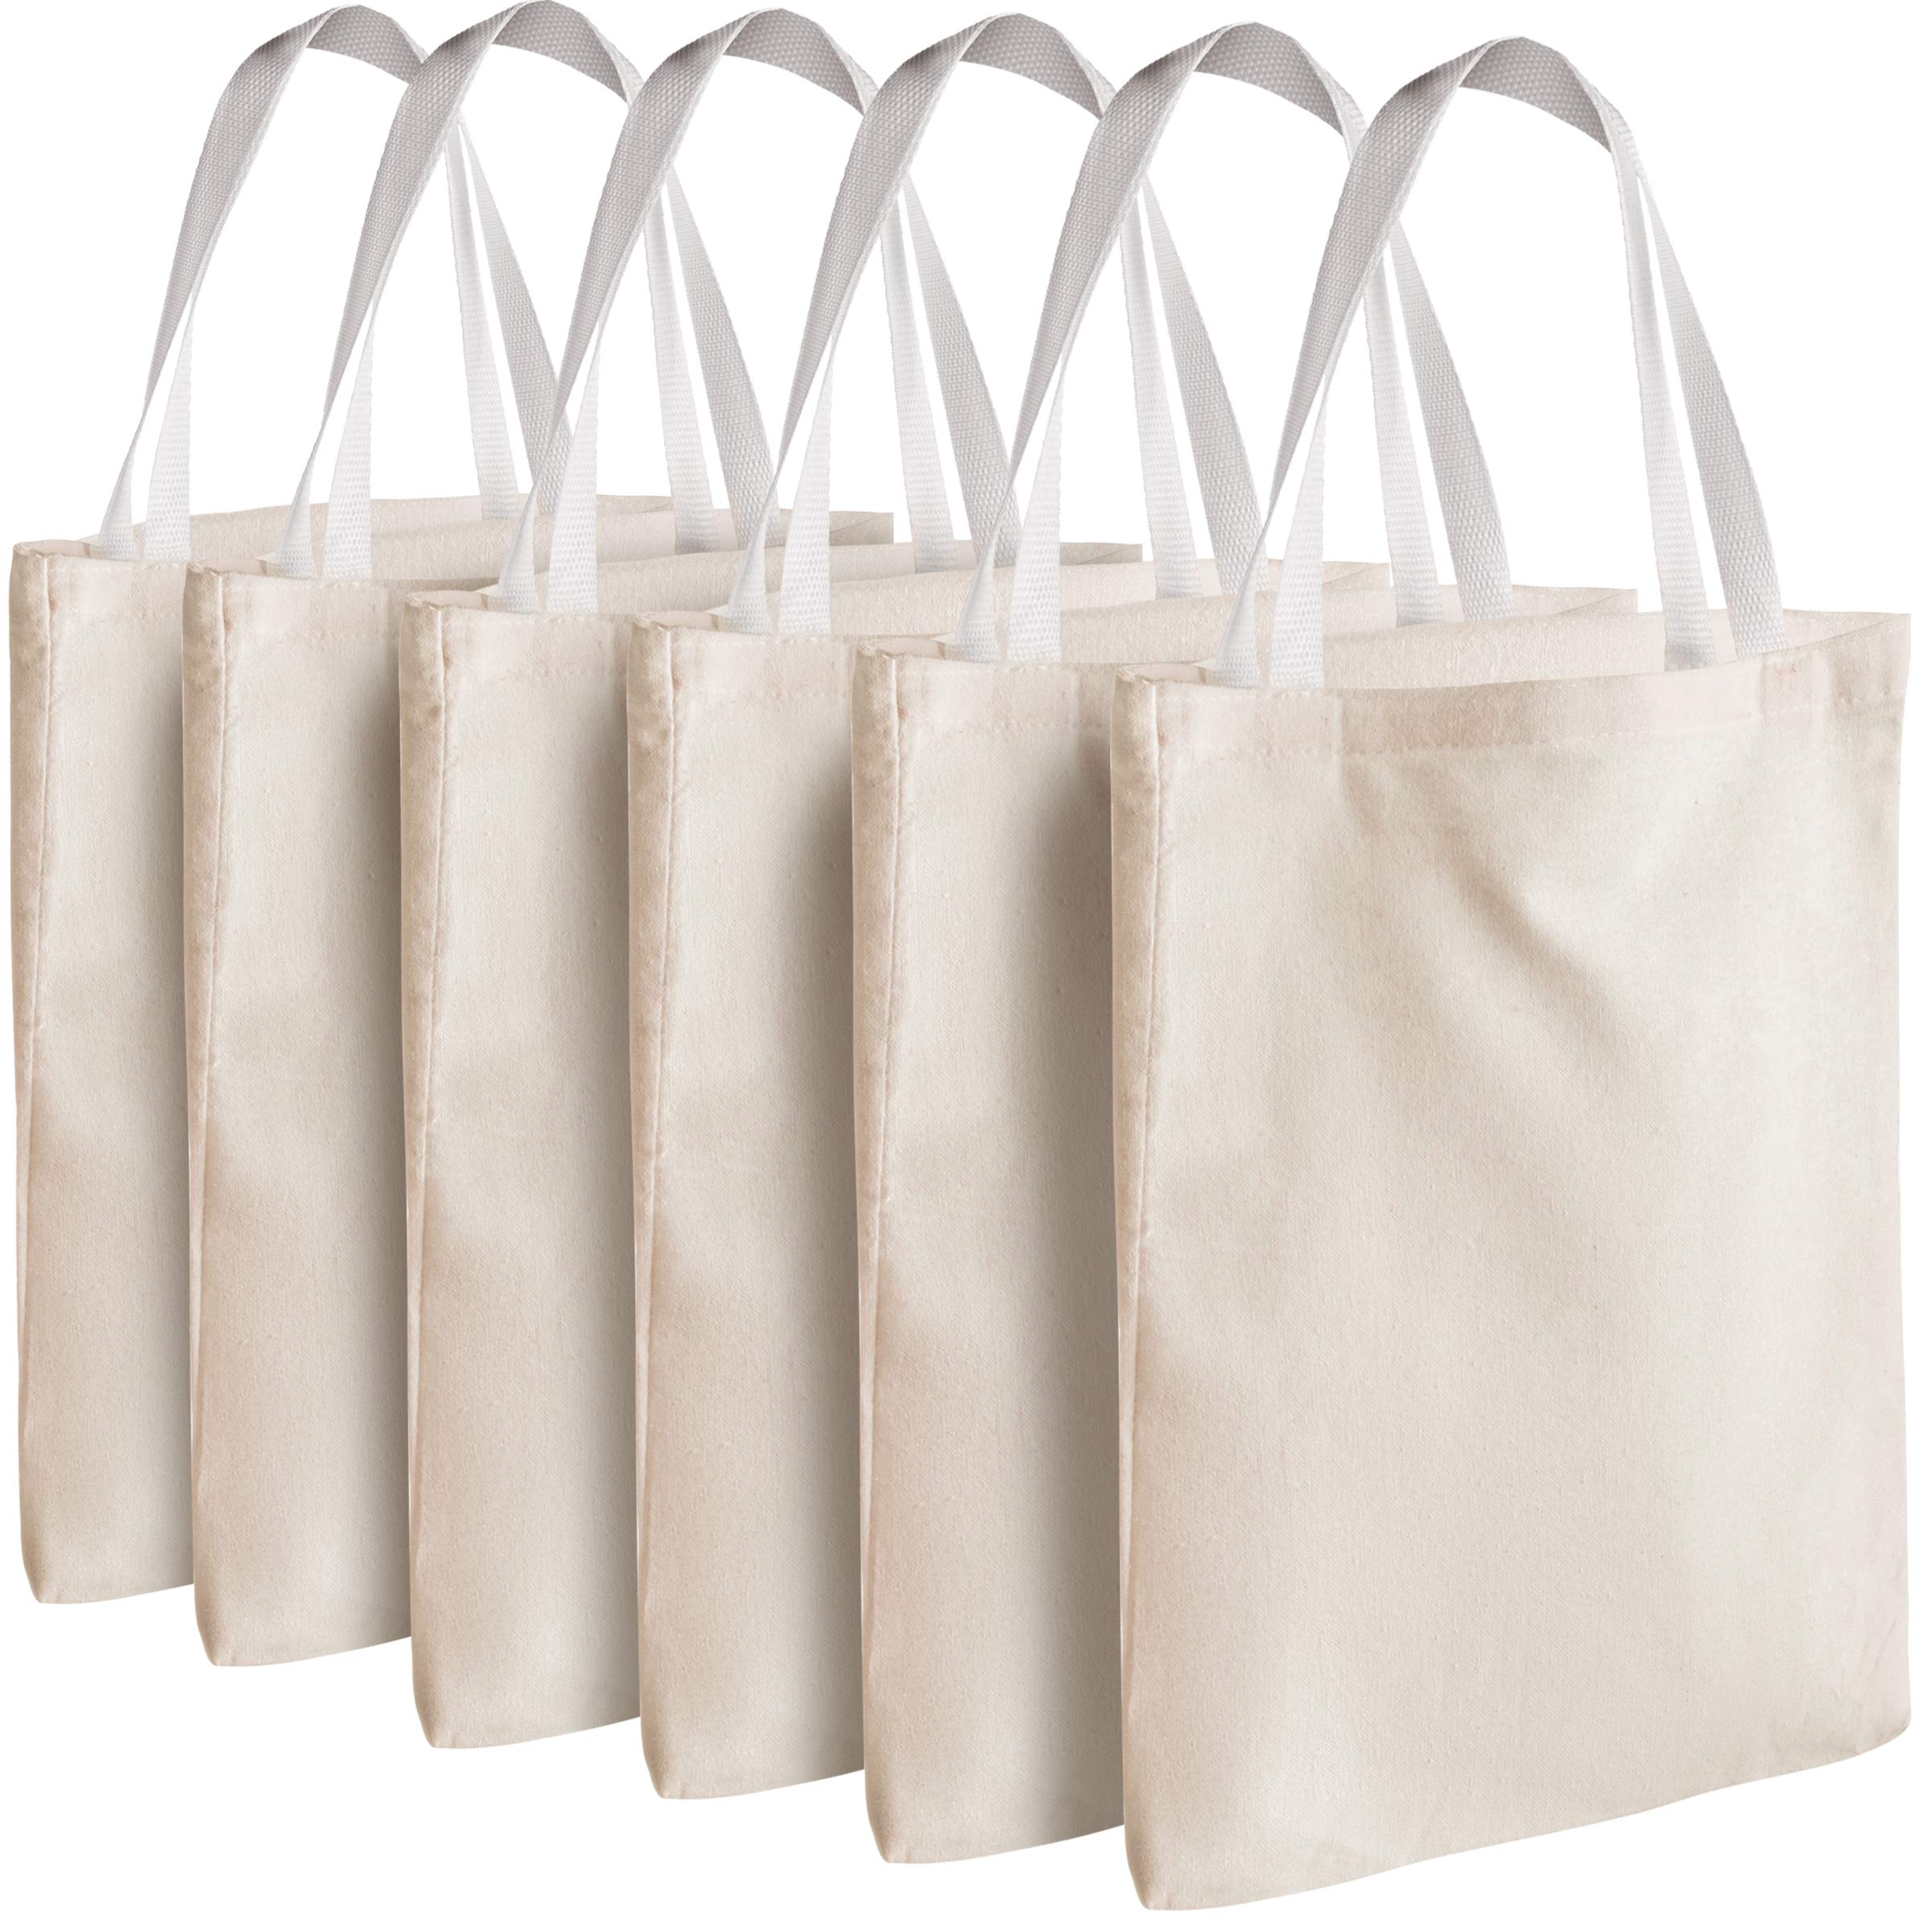 Bedwina Canvas Tote Bags - Bulk 15 Pack 15"x16" - Fabric Blank Tote Bags, Natural Cotton for DIY Crafts, Gift Bag and Wedding, Birthday, Promotion Giveaways, or Reusable Grocery Bag